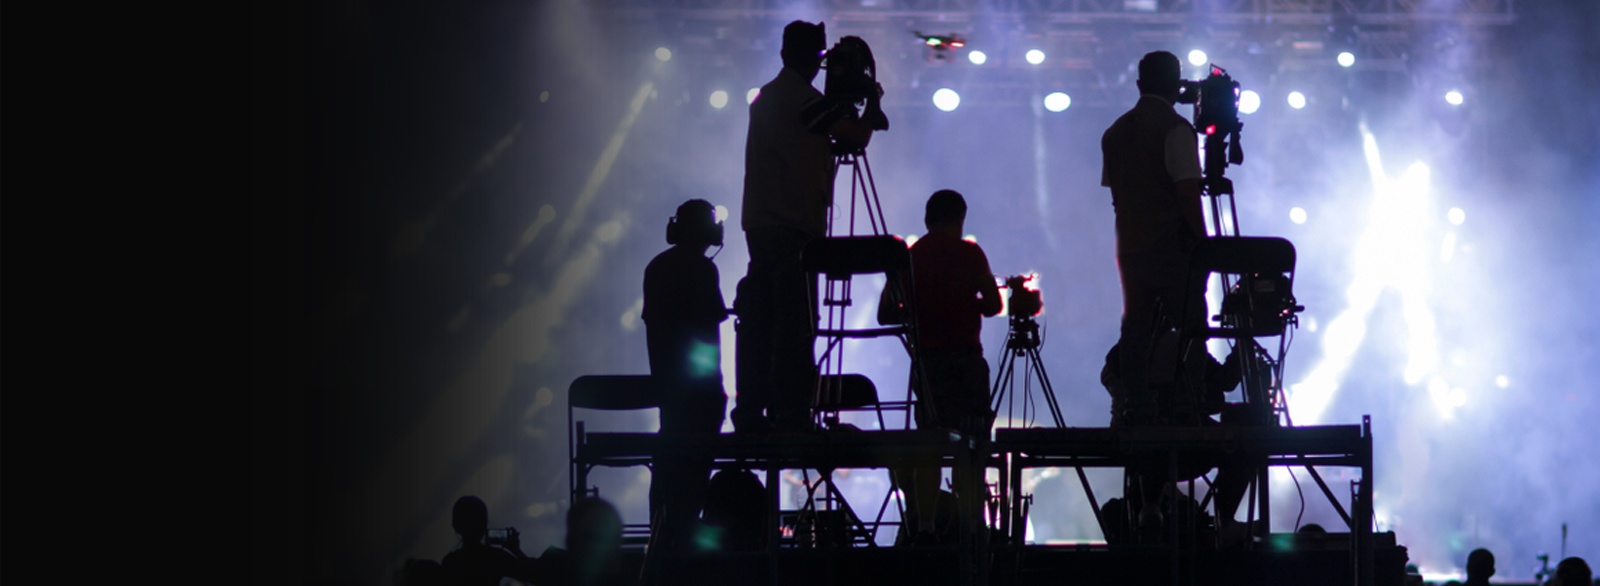 Waterloo Commercial, Event & Music Video Production Services